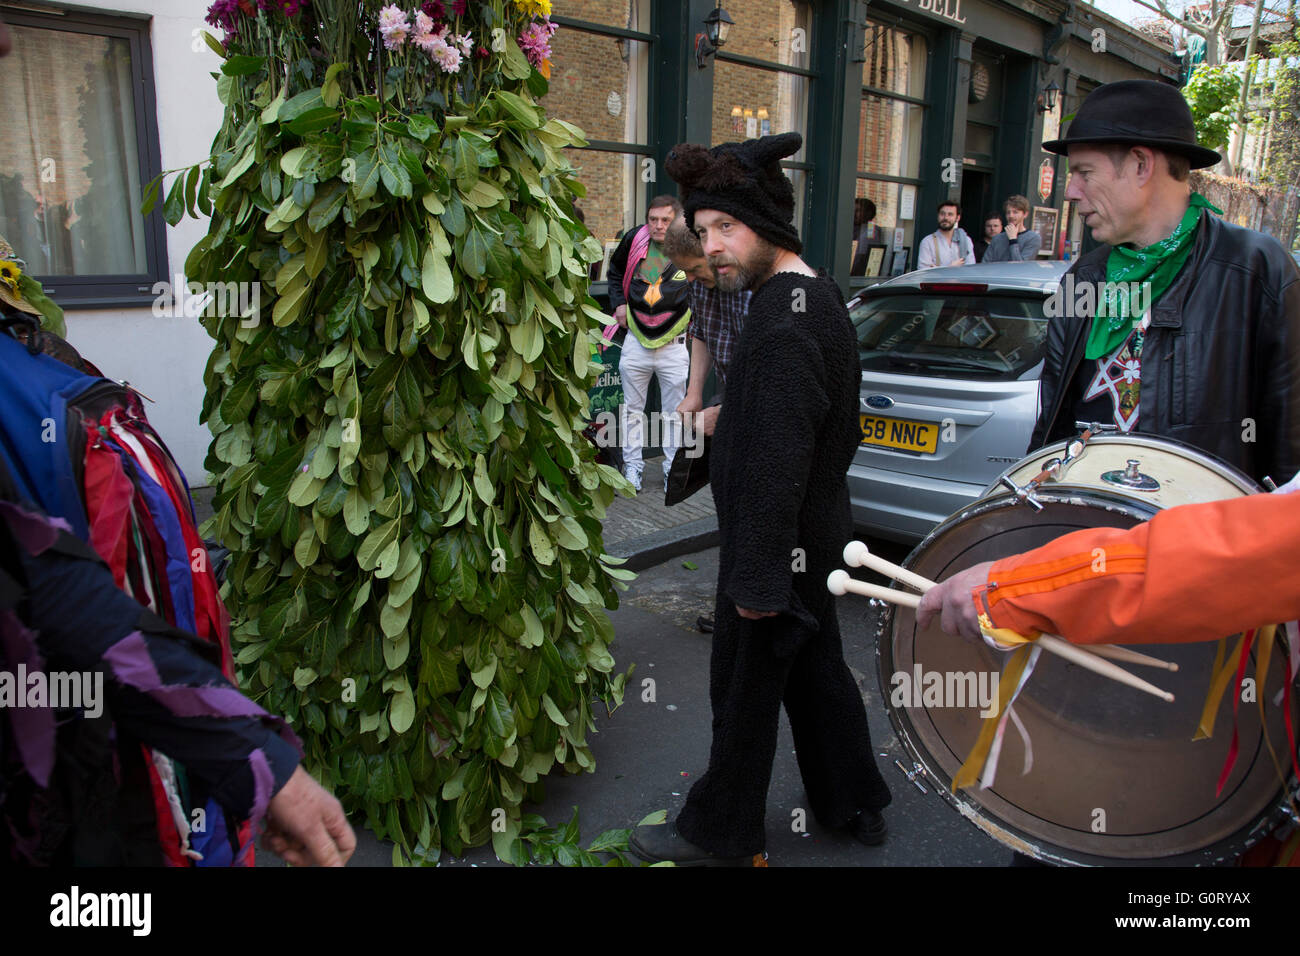 May Day custom of Deptford Jack in the Green, a man encased in a framework entirely covered with greenery, is one of the lesser-known modern revivals by the Blackheath Morris Men of English traditional customs on May 1st 2016 in London, United Kingdom. Preparations out in the street outside the Dog and Bell pub. Fowlers Troop Jack in the Green was revived in the early 1980s. Originally a revival from about 1906, it developed from the 17th Century custom of milkmaids going out on May Day with the utensils of their trade, decorated with garlands of flowers and piled into a pyramid which they car Stock Photo